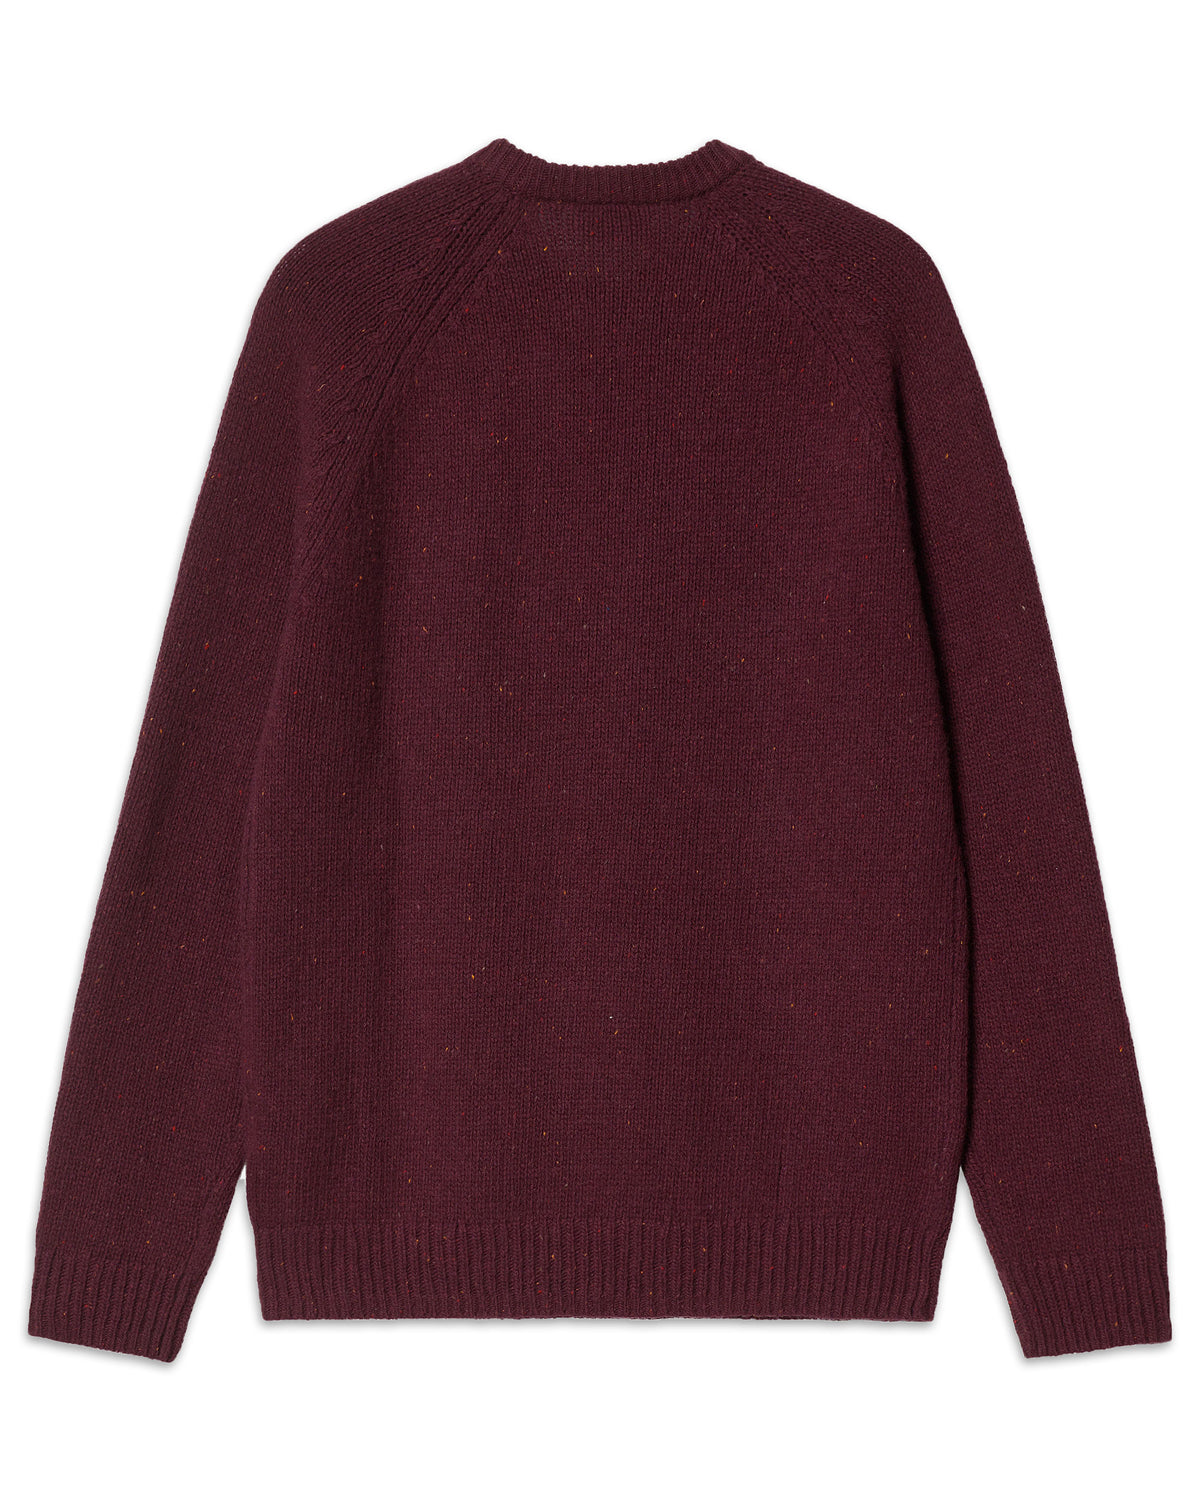 Maglione Carhartt Bordeaux I010977-0JHXX